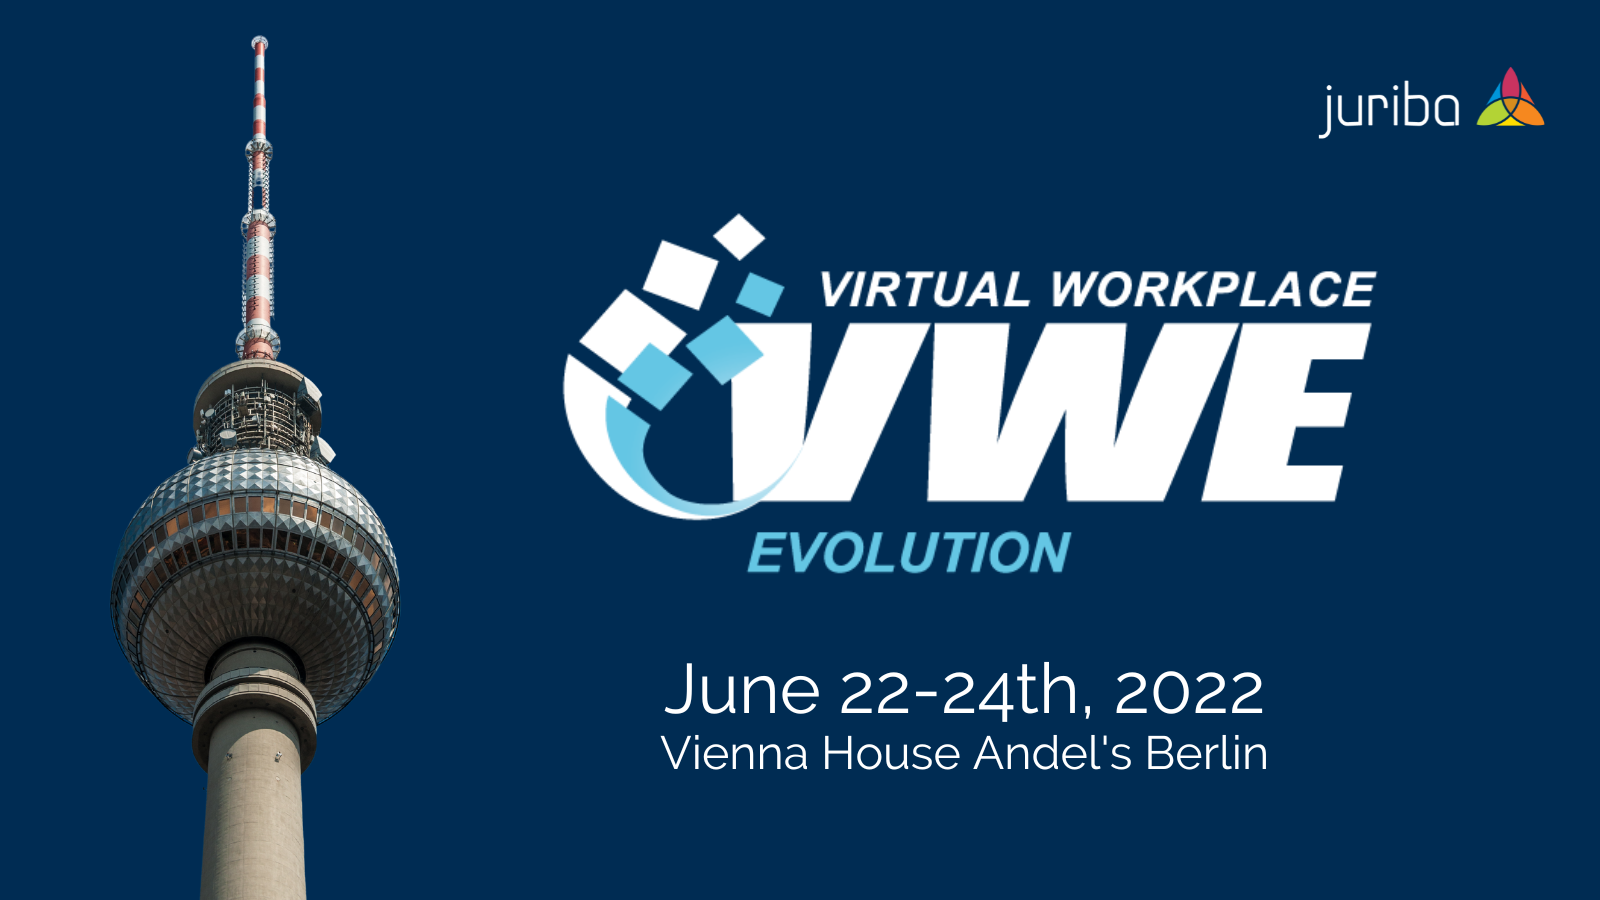 Meet Us At The Virtual Workplace Evolution Event In Berlin